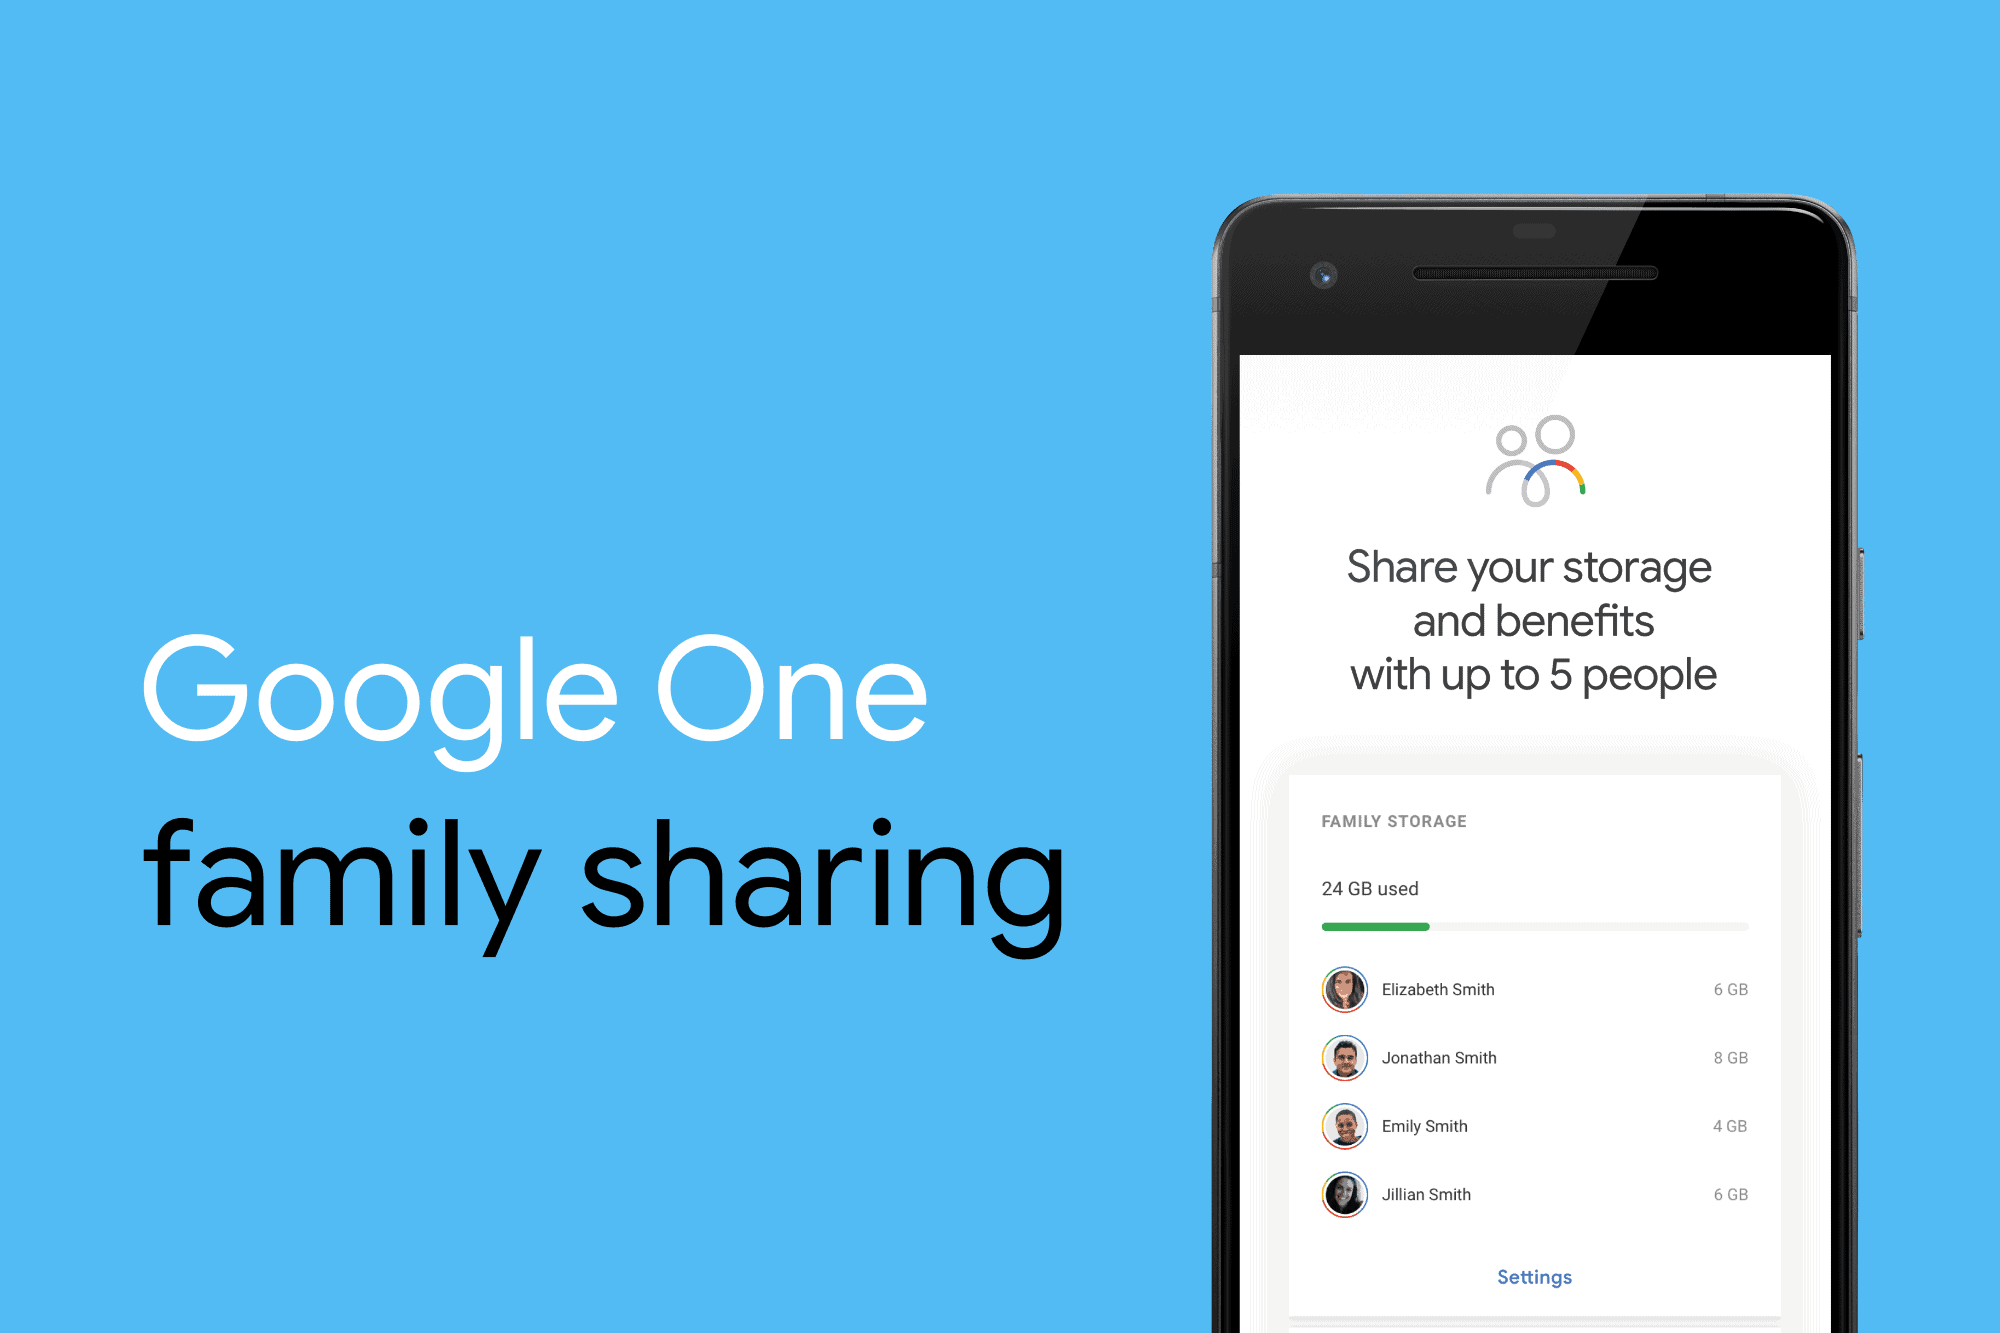 How to Share Google One Storage with Family